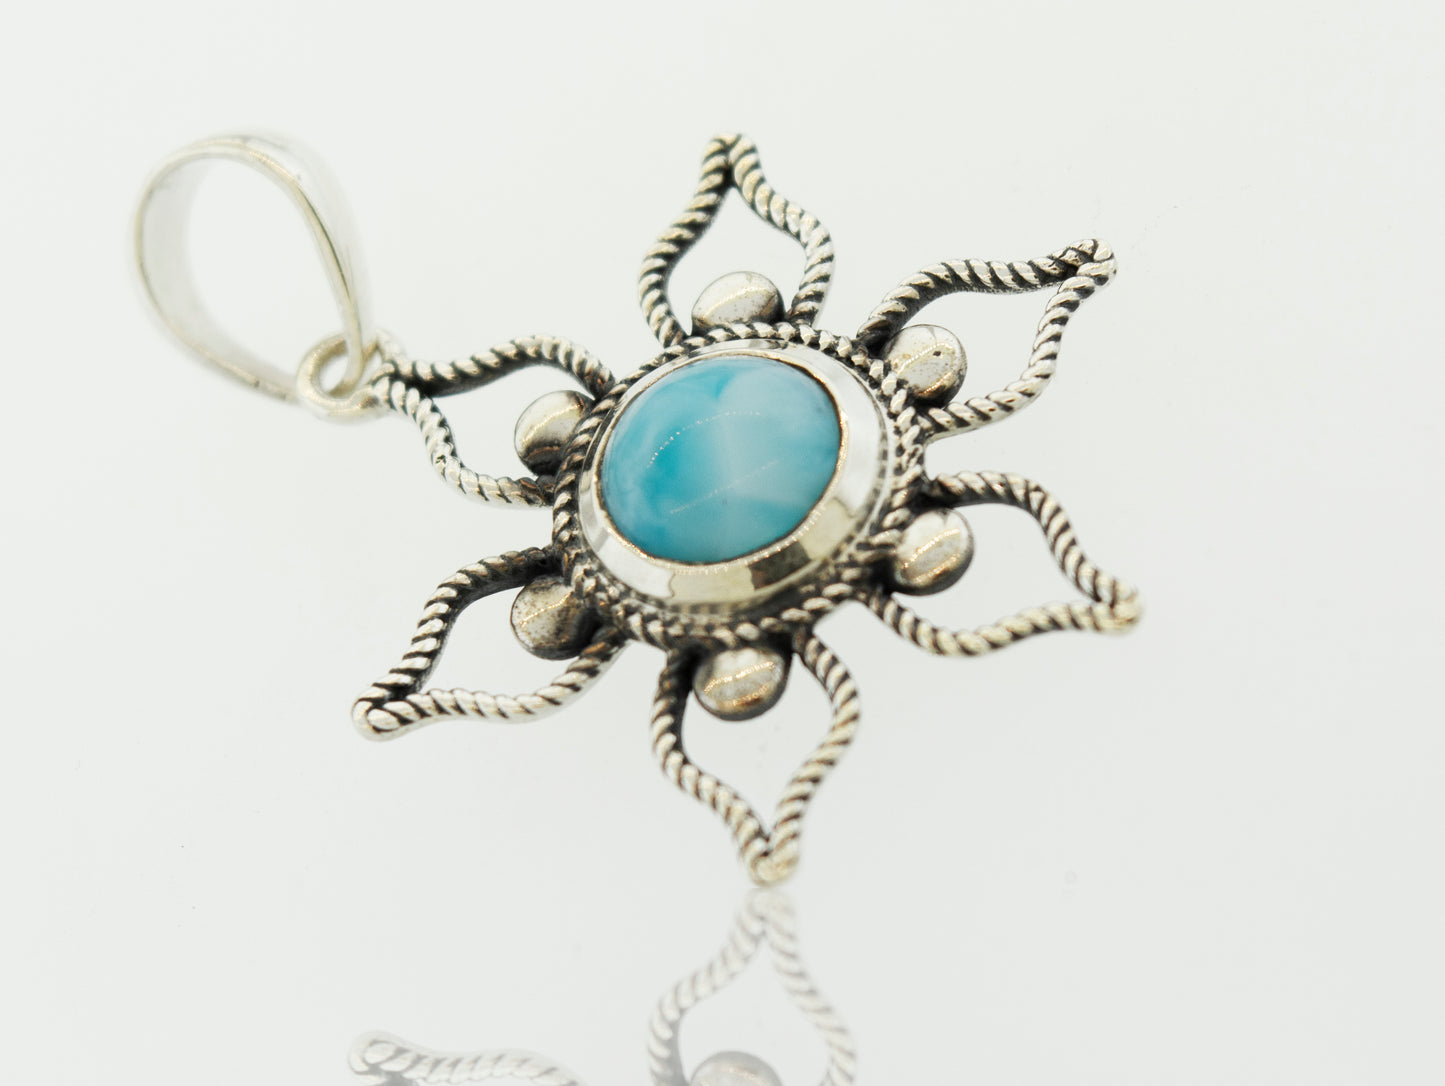 A Super Silver Larimar Flower Pendant, perfect for a beach day.